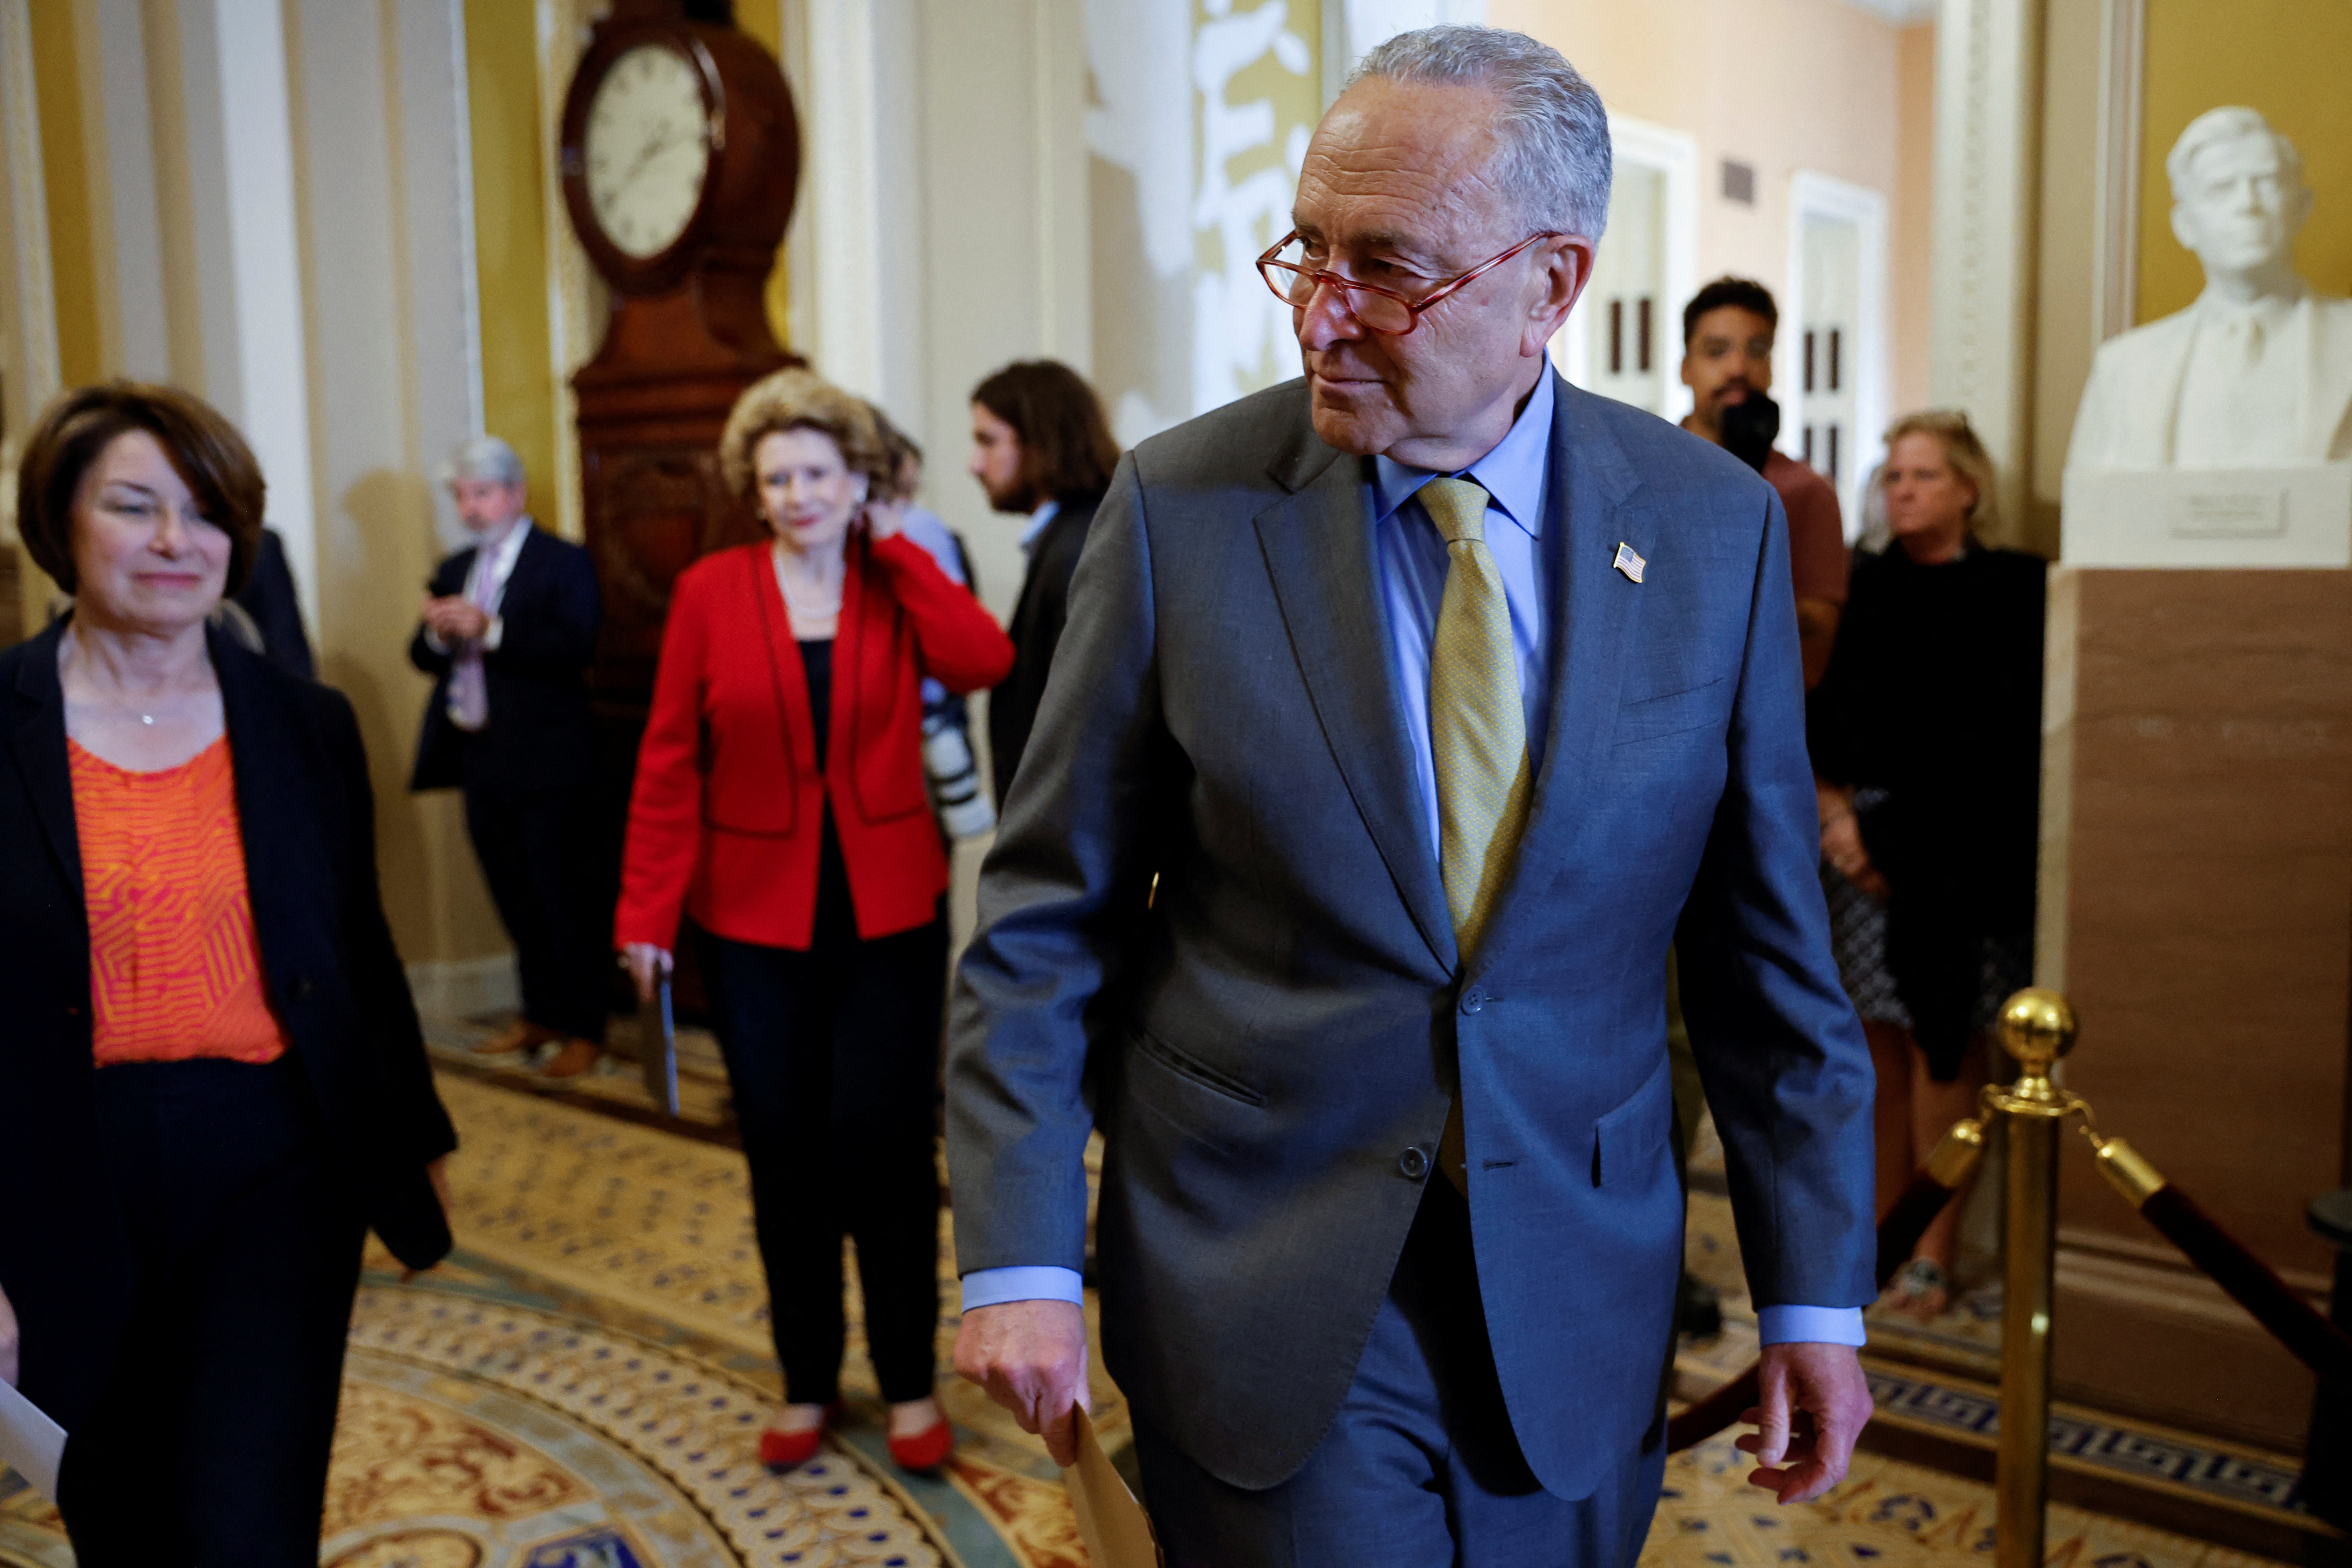 U.S. Senate Majority Leader Schumer speaks with reporters at the U.S. Capitol in Washington